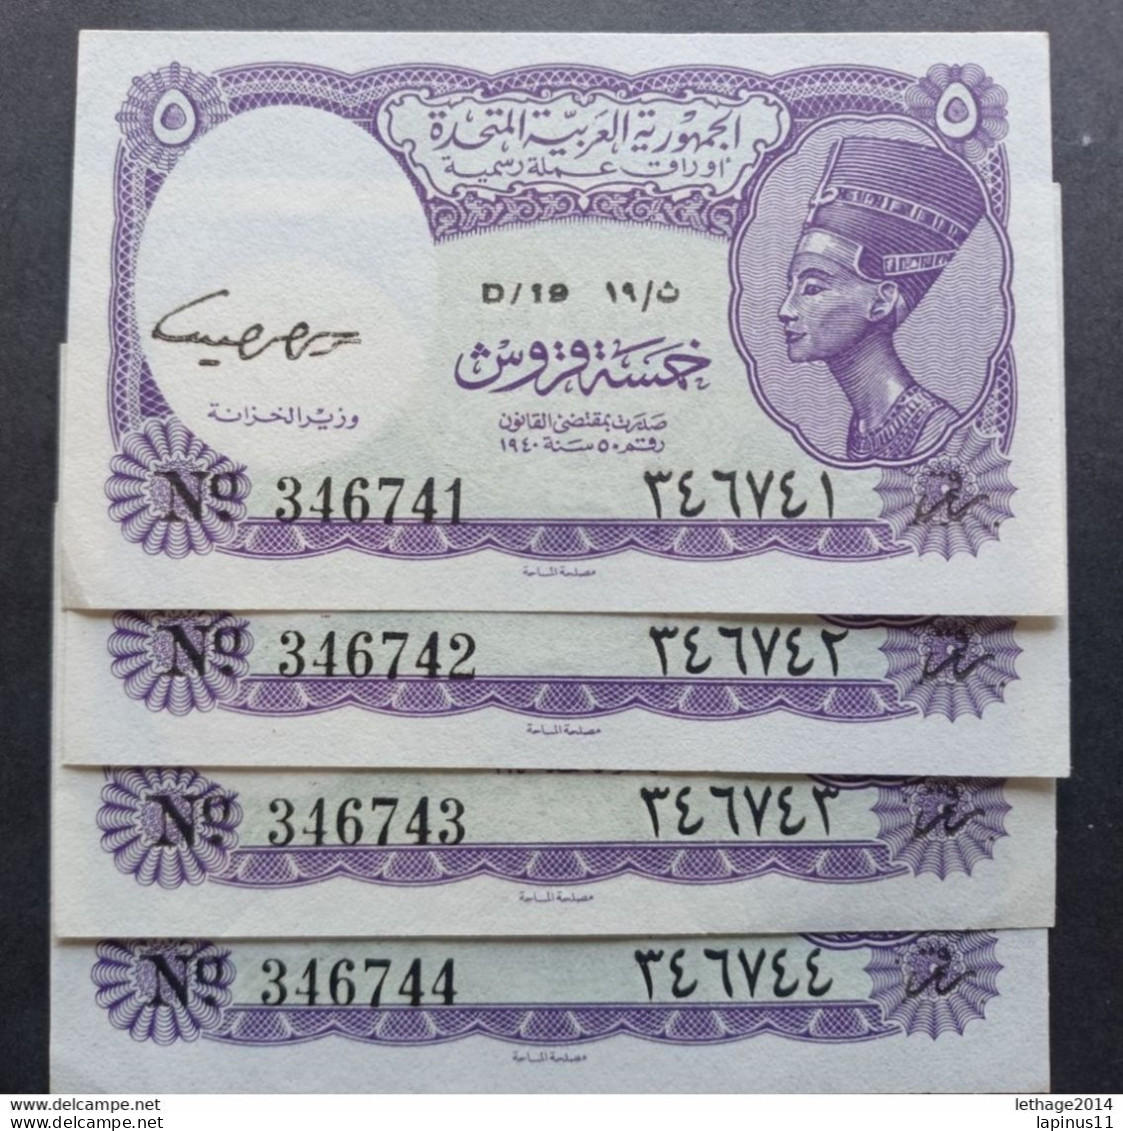 BANKNOTE EGITTO 5 P 1940 UNCIRCULATED SEQUENTIAL NUMBERS PARTIAL SIGNATURE DECAL 4 ERROR NUMBER 4 SERIAL BROKEN - Egypte